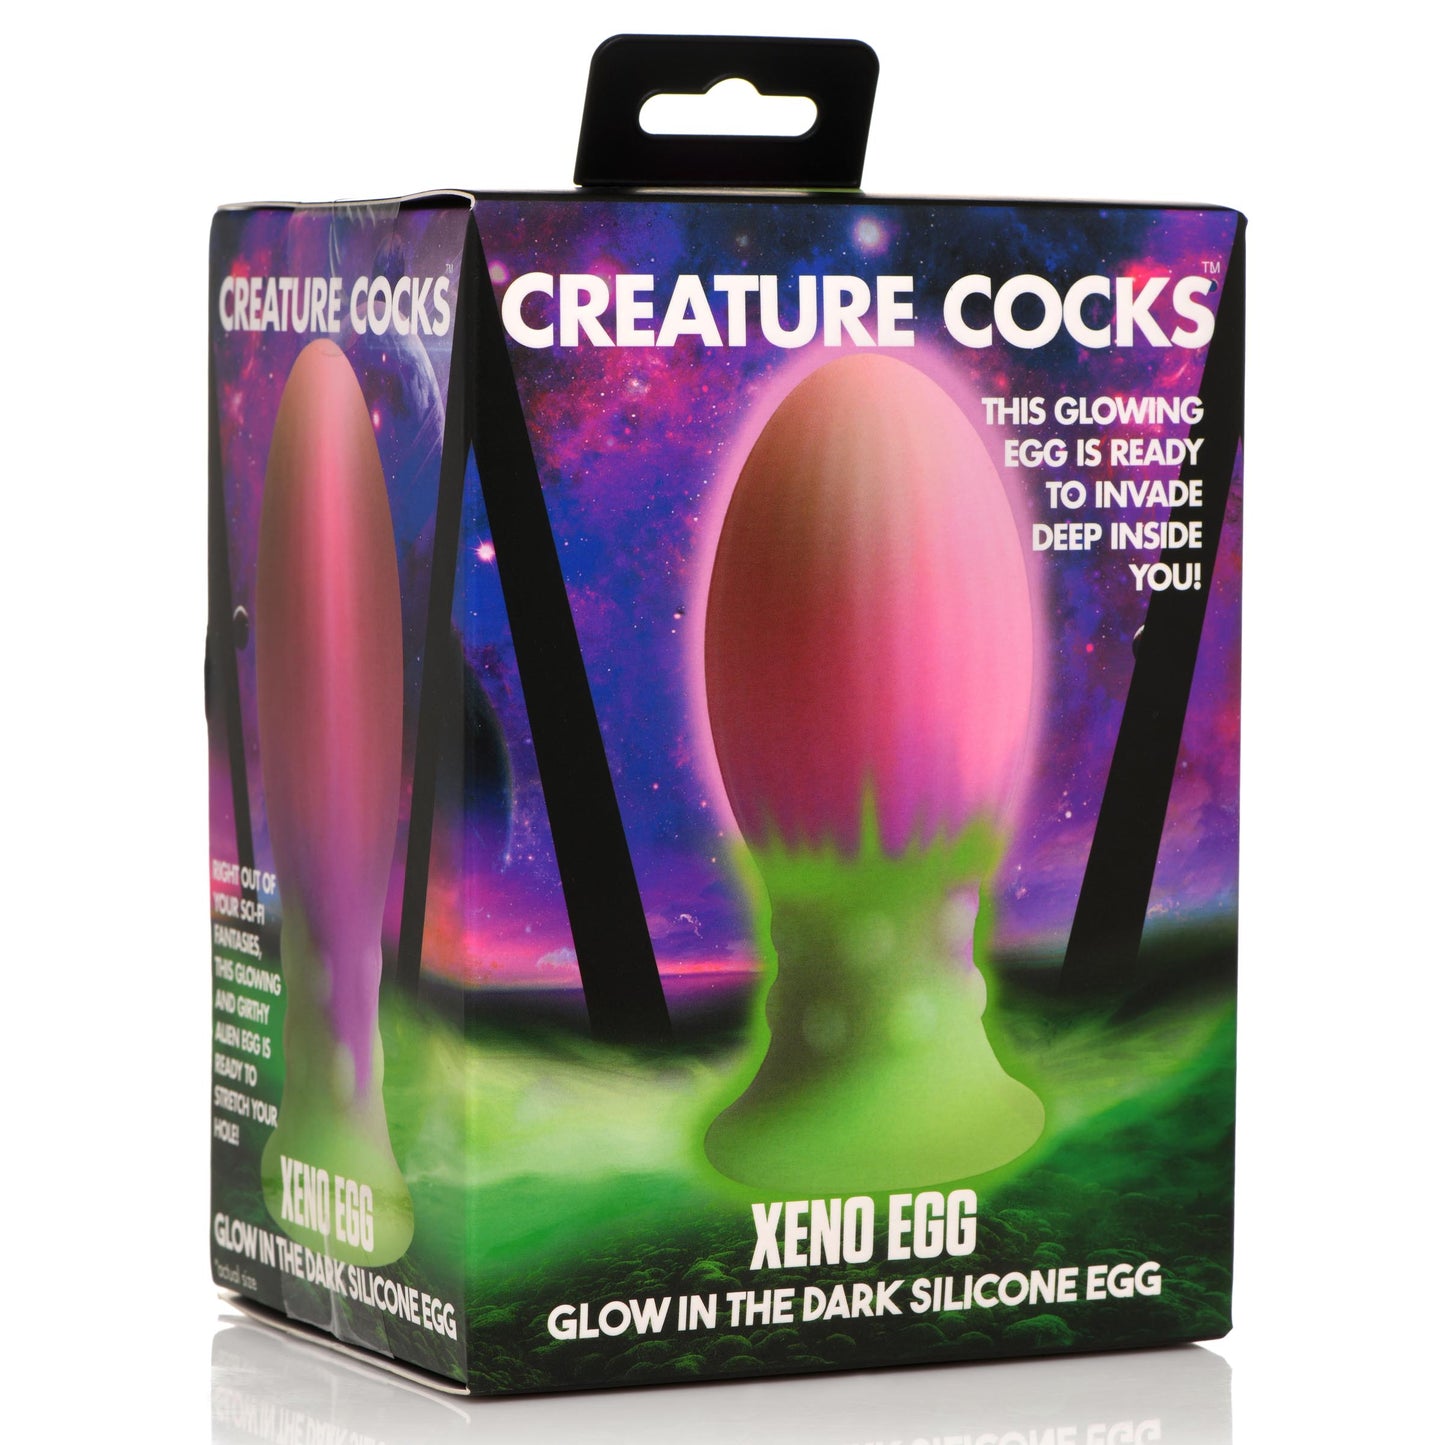 Xeno Egg Glow In The Dark Silicone Egg - Large